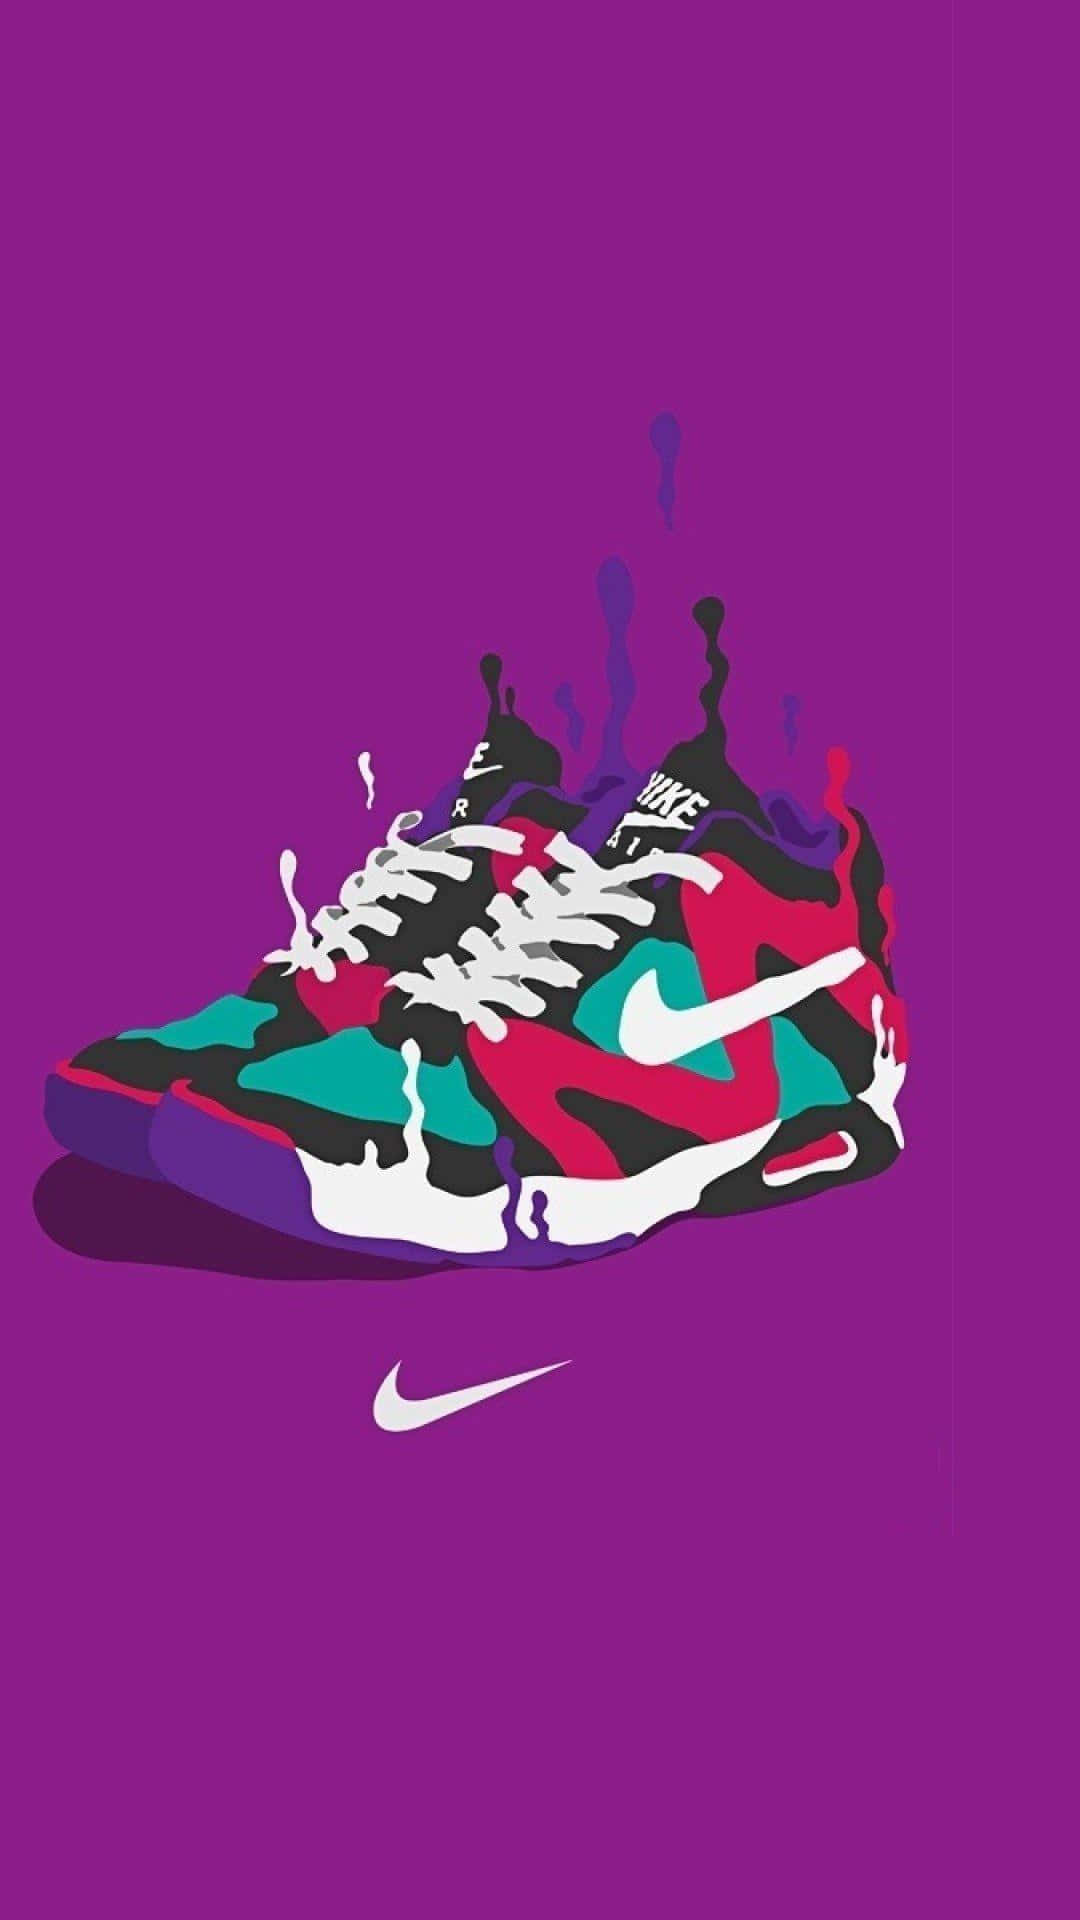 Adorable pair of stylish sneakers on a playful, artsy background Wallpaper